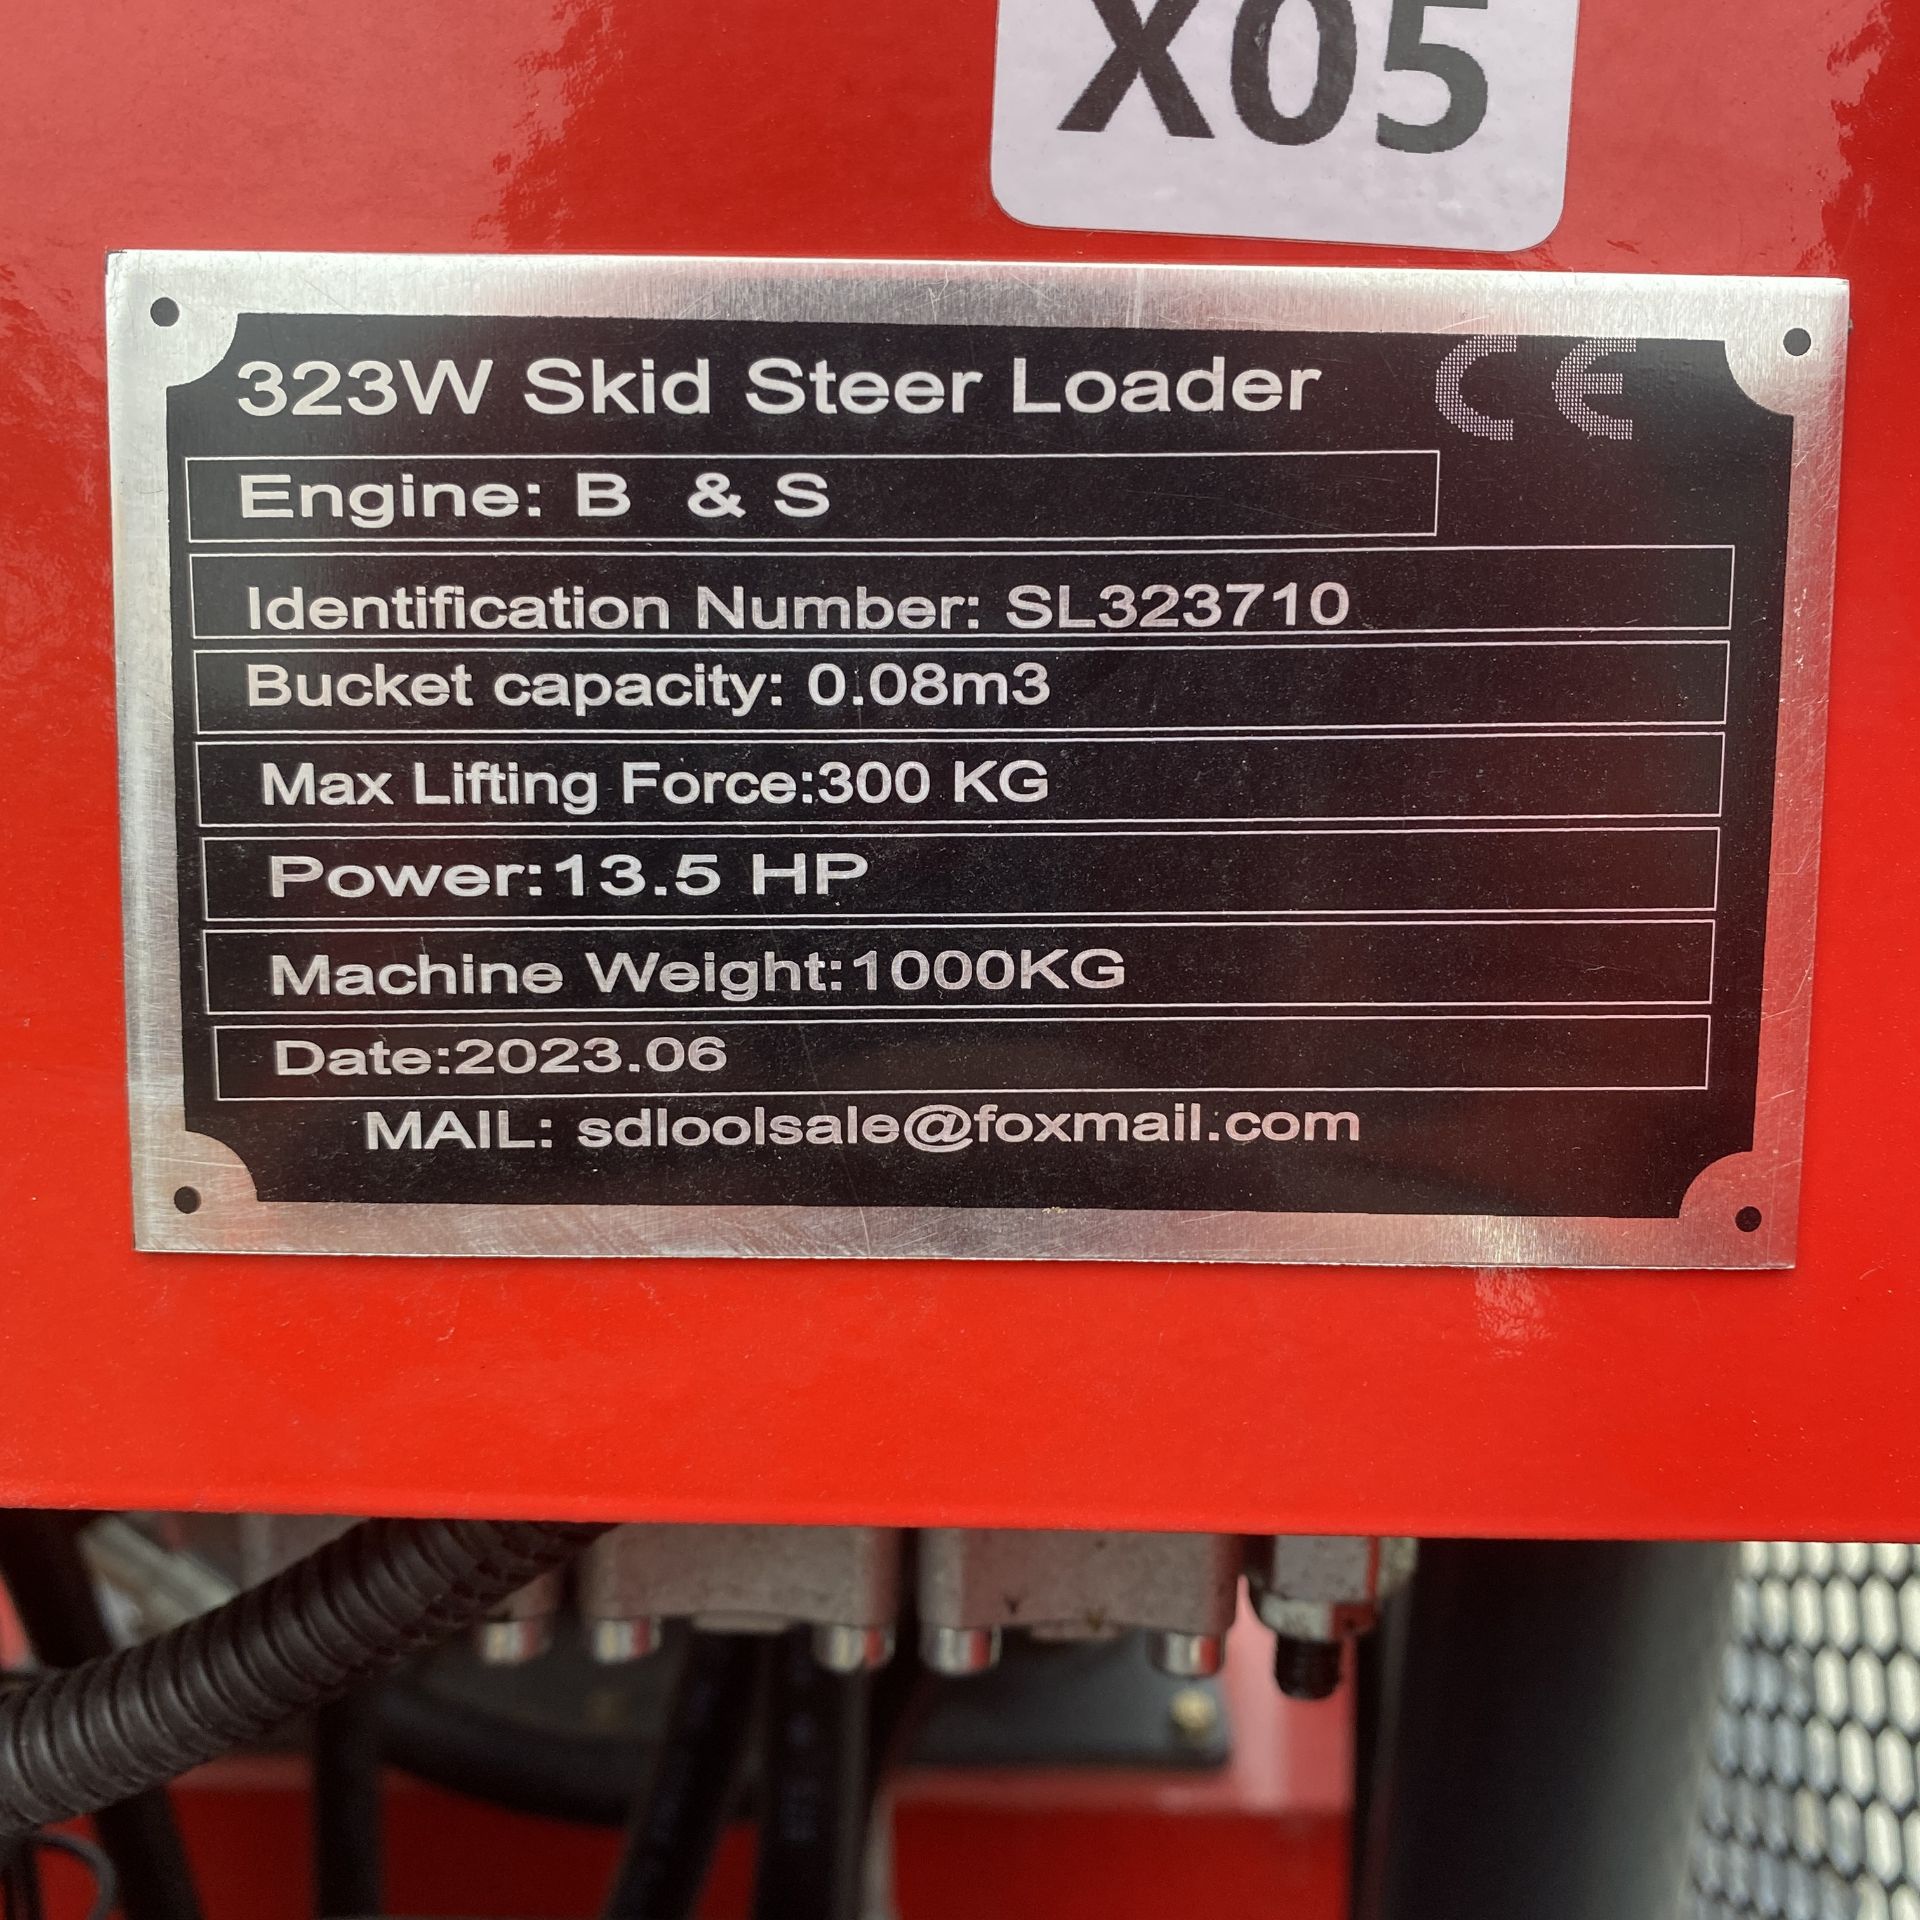 NEW SDLOO 323W SKID STEER LOADER WITH B & S 13.5HP XR ENGINE - Image 6 of 6